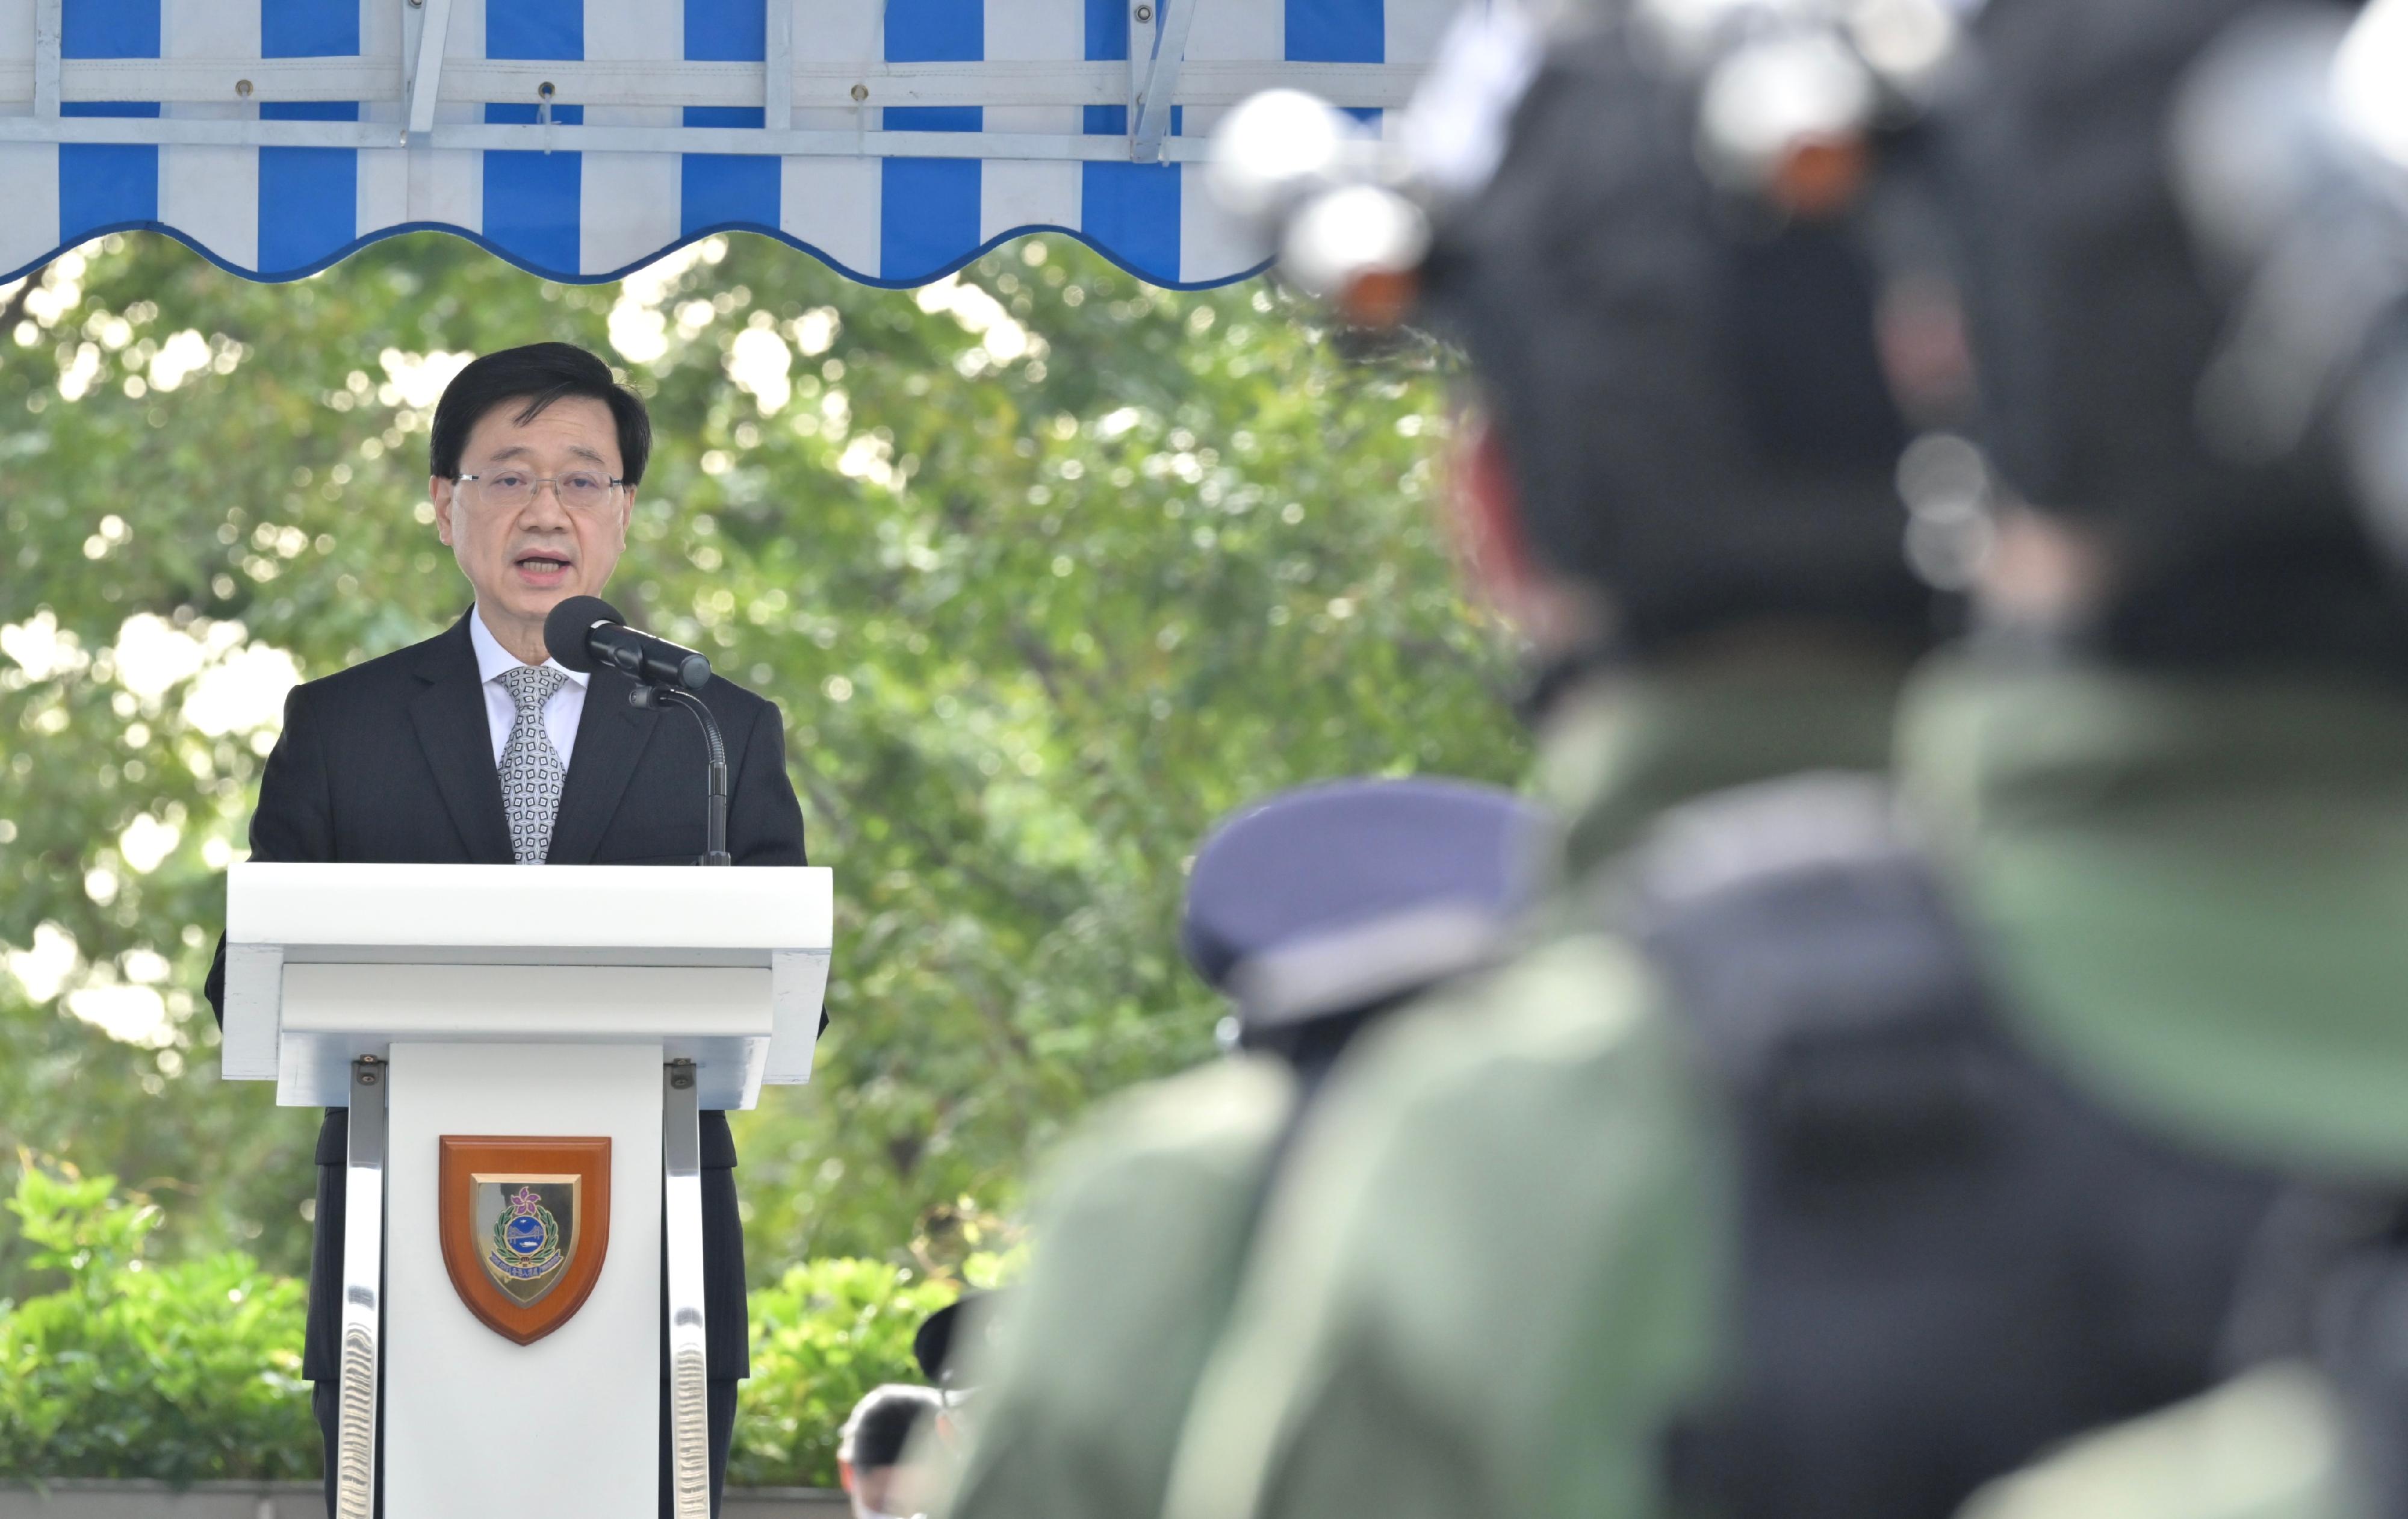 The Chief Executive, Mr John Lee, delivers a speech at the Immigration Department Passing-out Parade today (December 2).